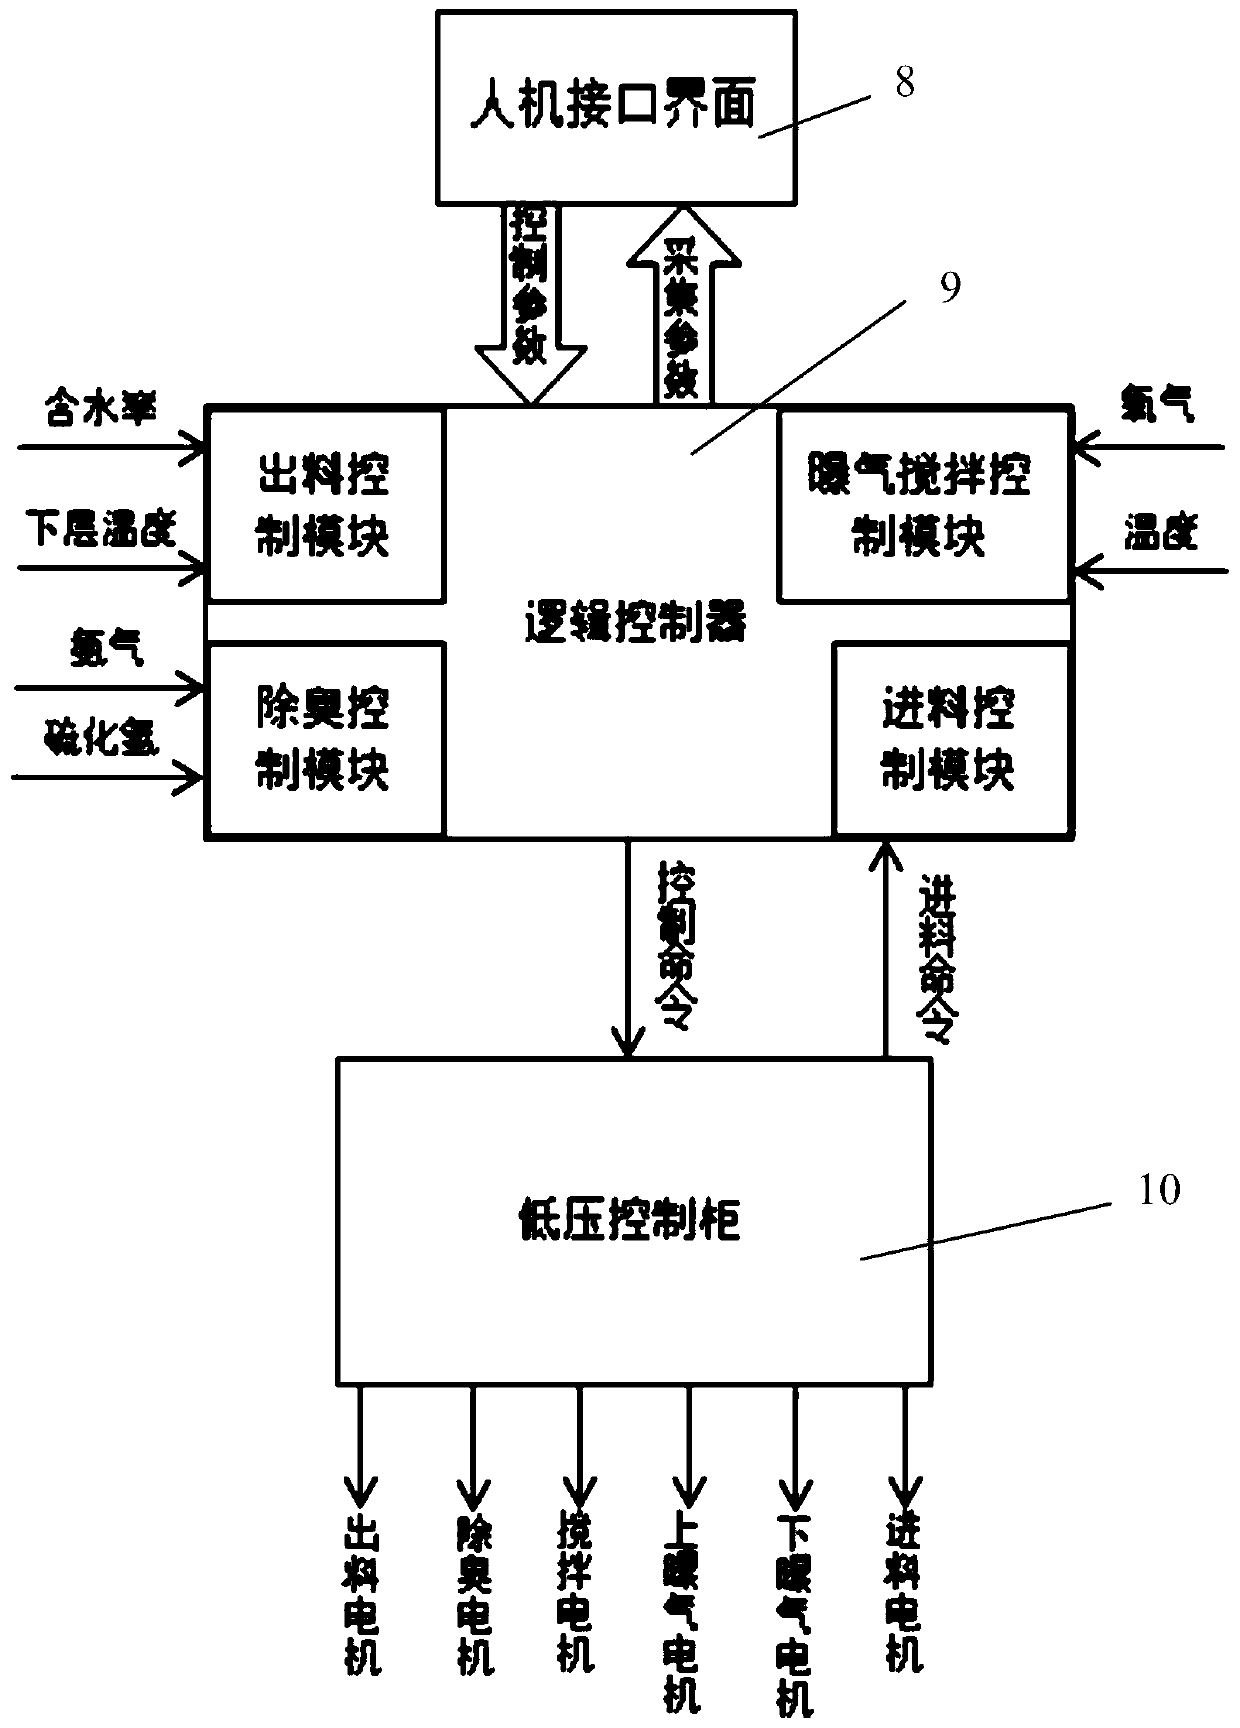 A vertical composting reactor and its control method and control system